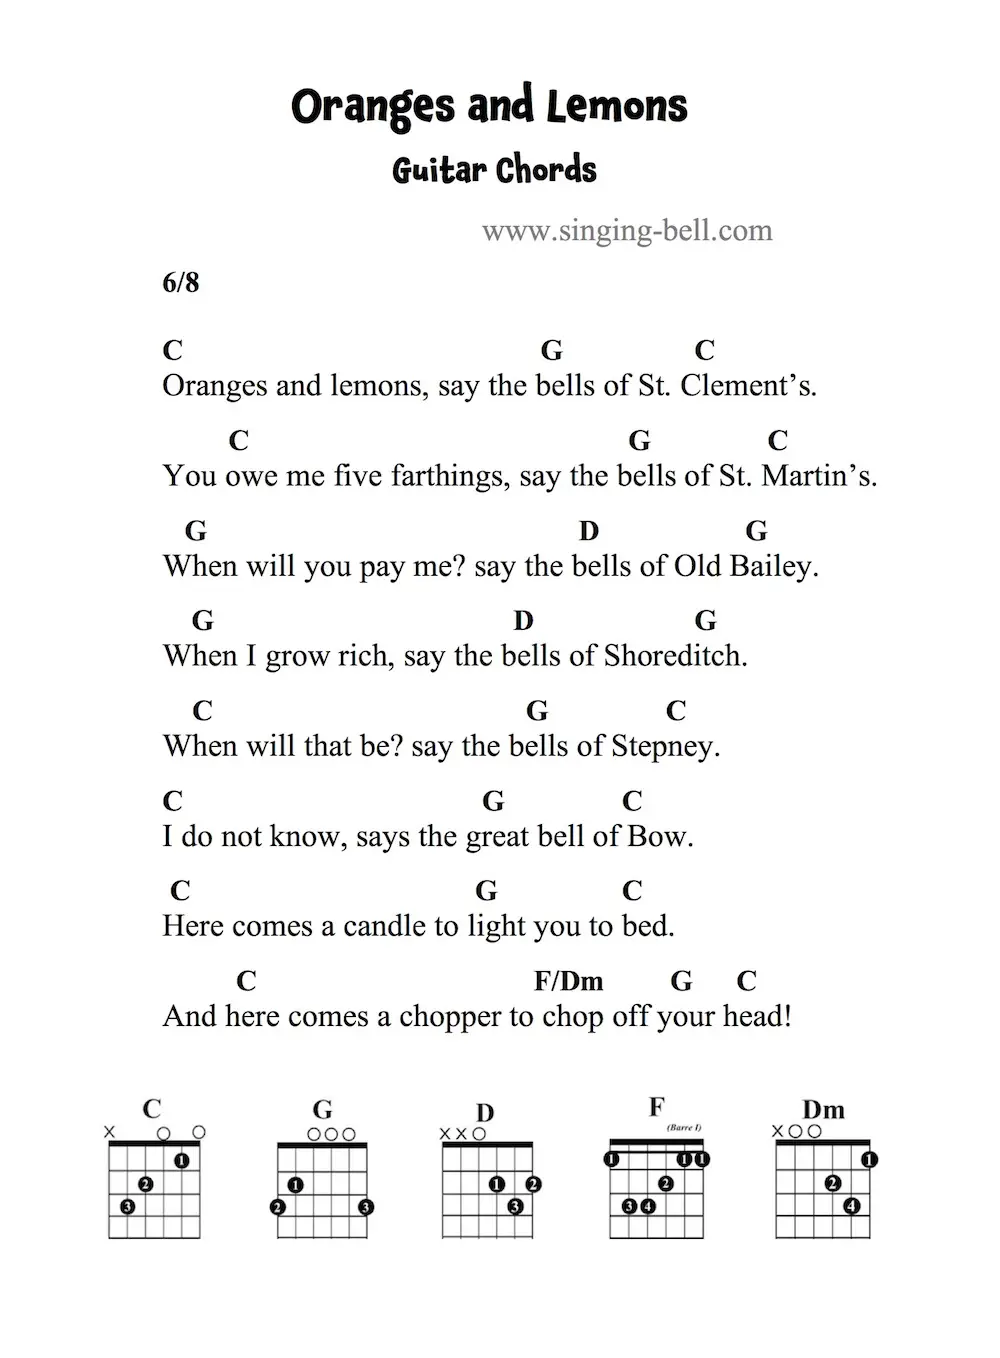 Oranges and Lemons - Guitar Chords and Tabs.